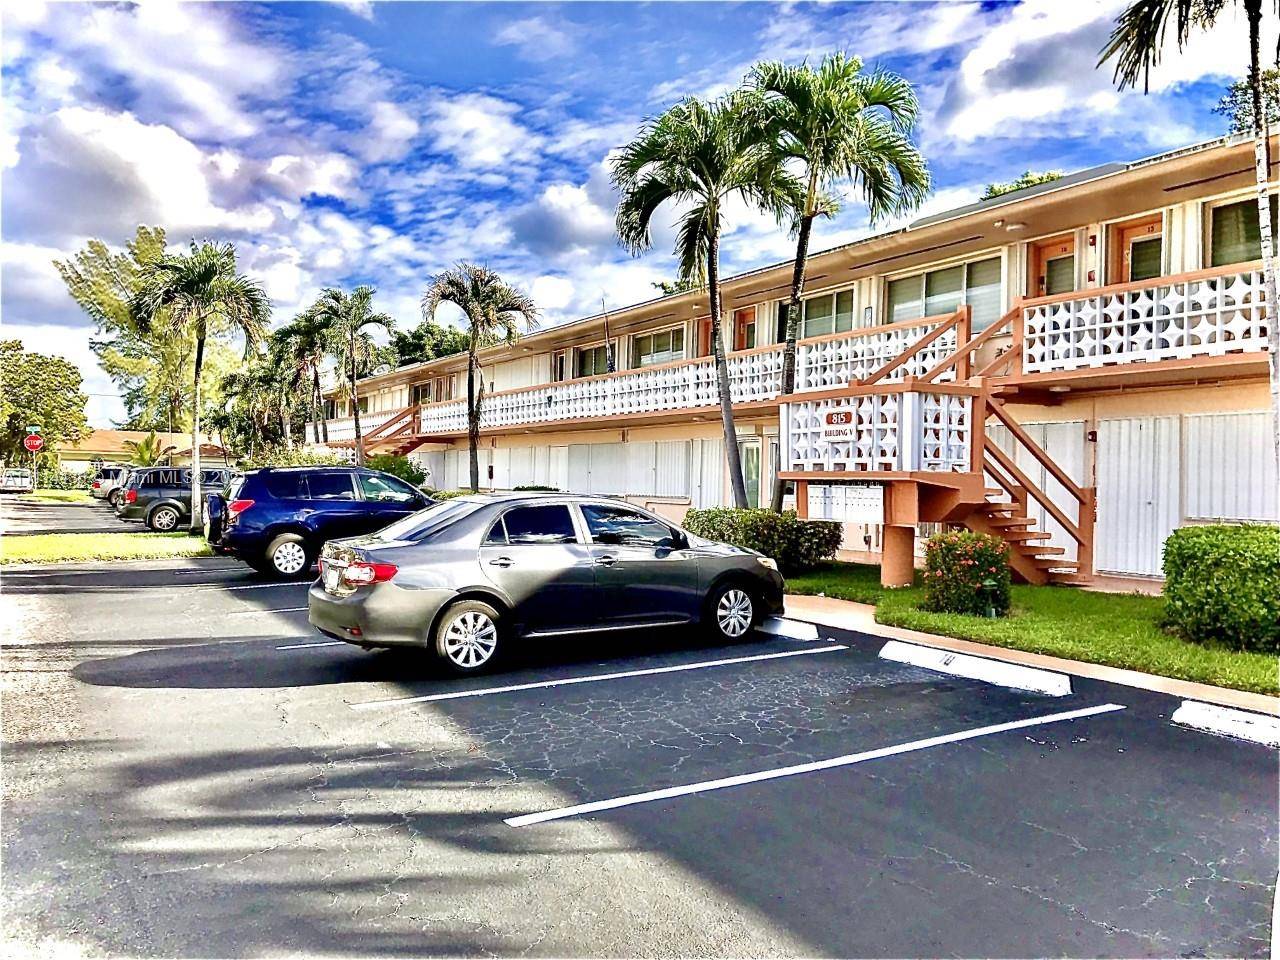 BEAUTIFUL UNIT IN DESARIBLE ROLEN LAKE GARDENDS GROUND FLOOR, RESORT LIVING STILE COMMUNITY, VERY WELL MAINTAINED AND LOW MAINTENANCE FEE, LOW TAXES, CLOSE TO THE BEACHES, GULFSTREAM CASINO AND VENTURA ...